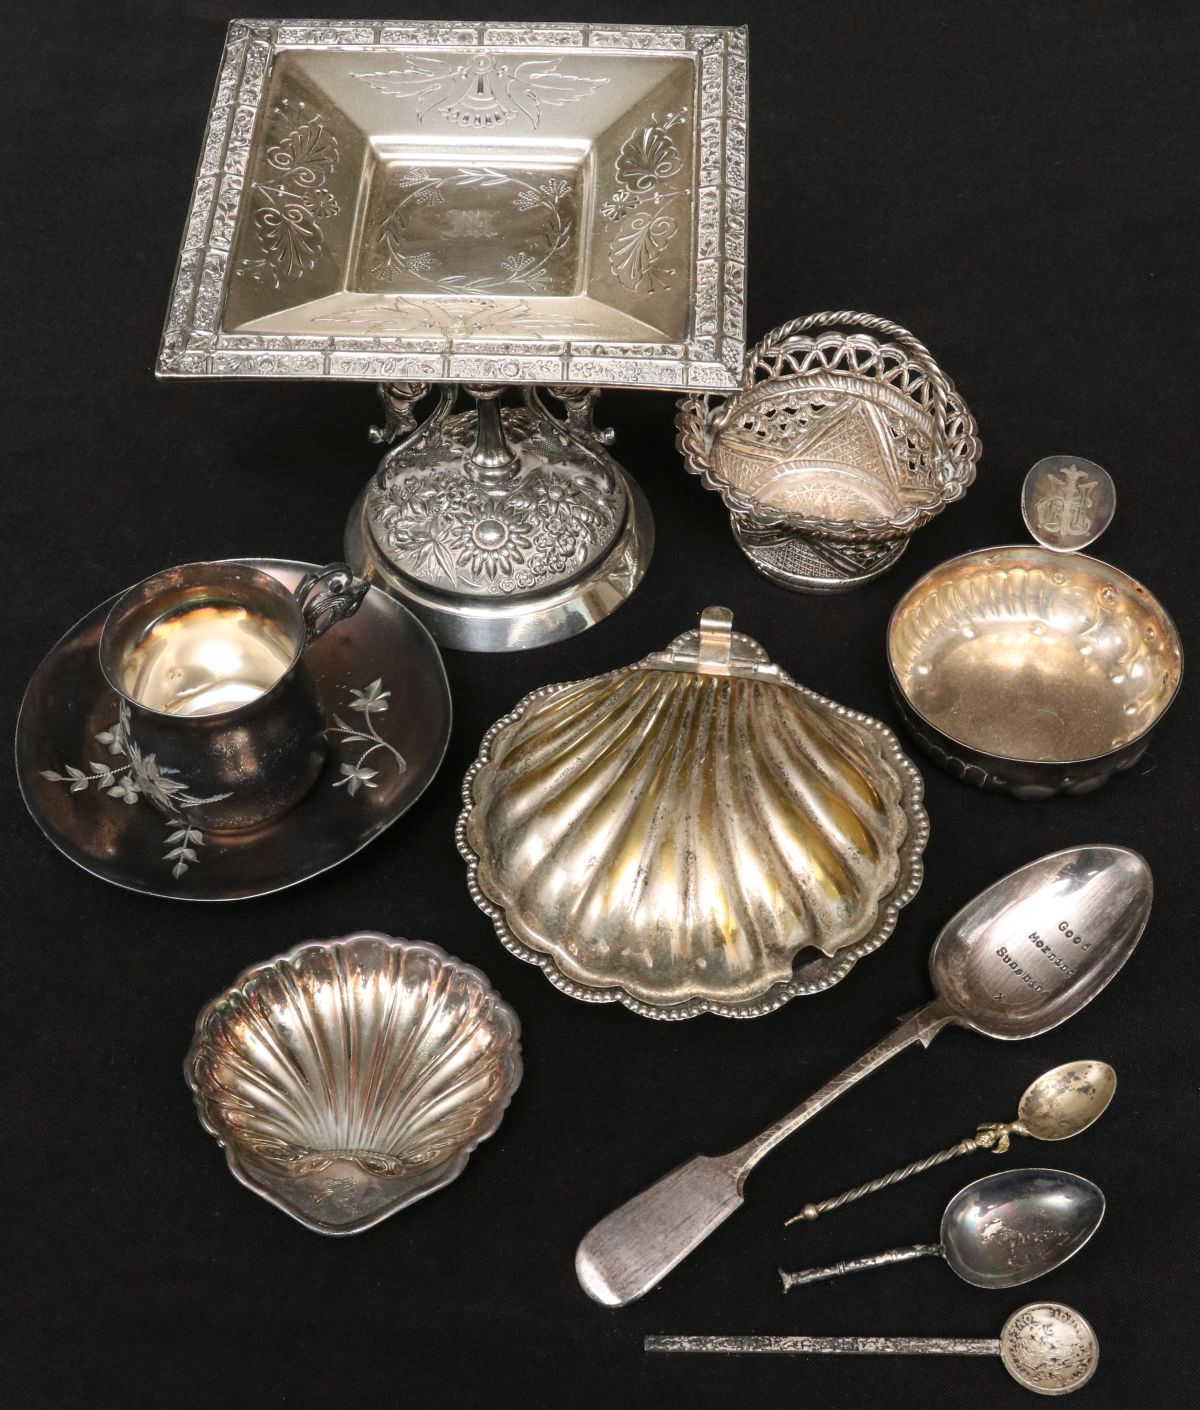 TUFTS AND OTHER VICTORIAN SILVER PLATE